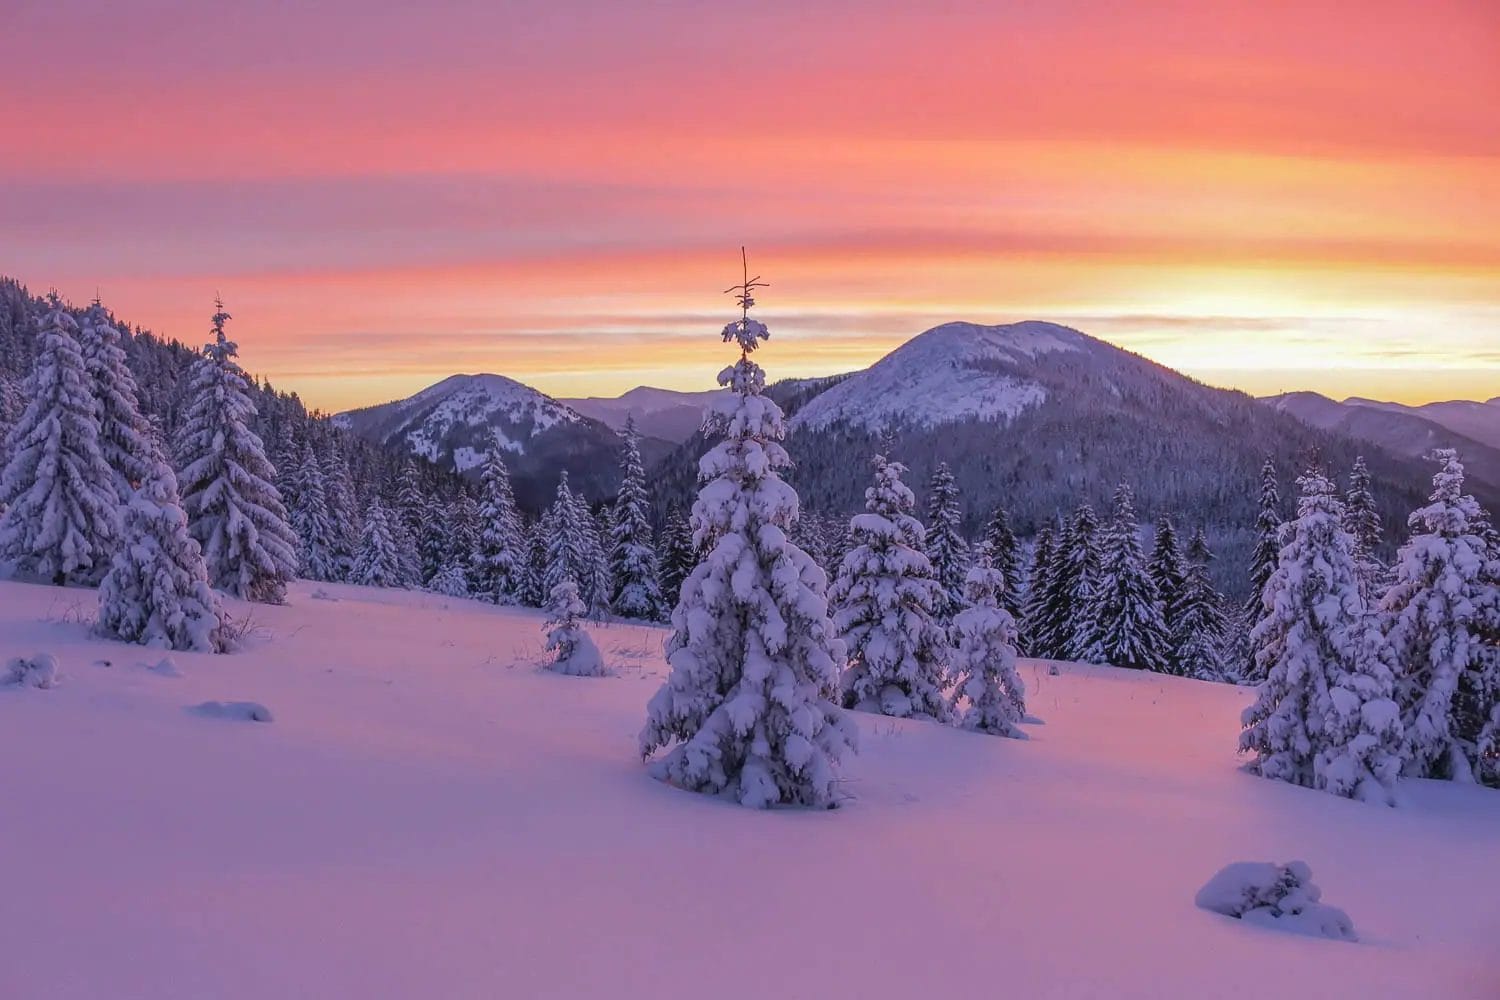 A serene winter sunrise over a snowy landscape with snow-covered trees.